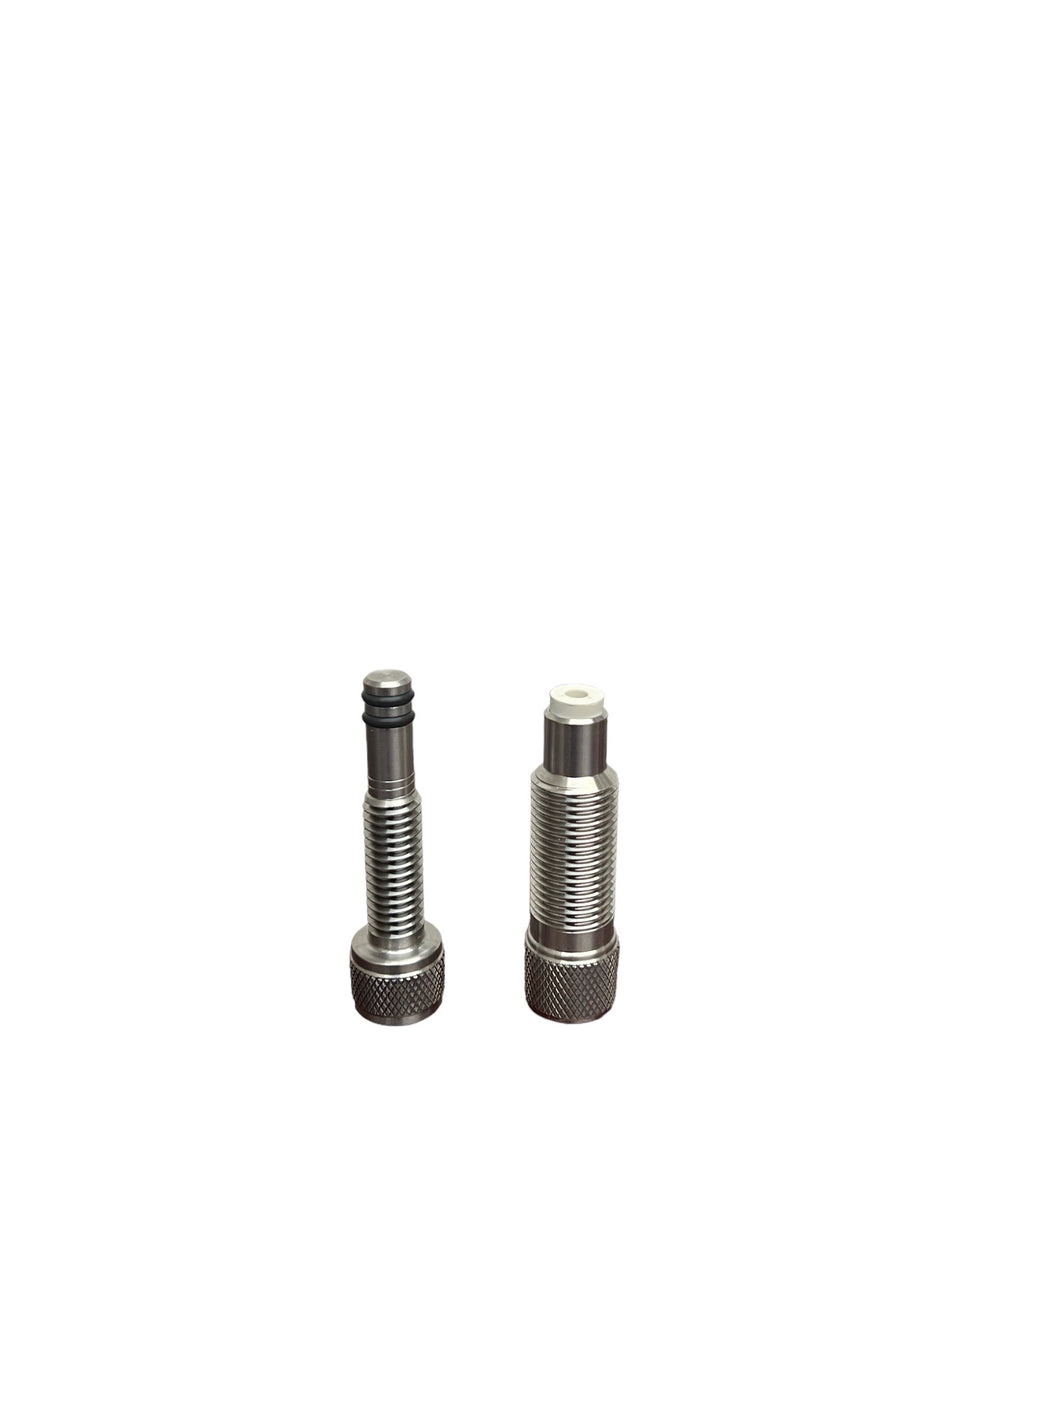 End seal style injector and plunger piece